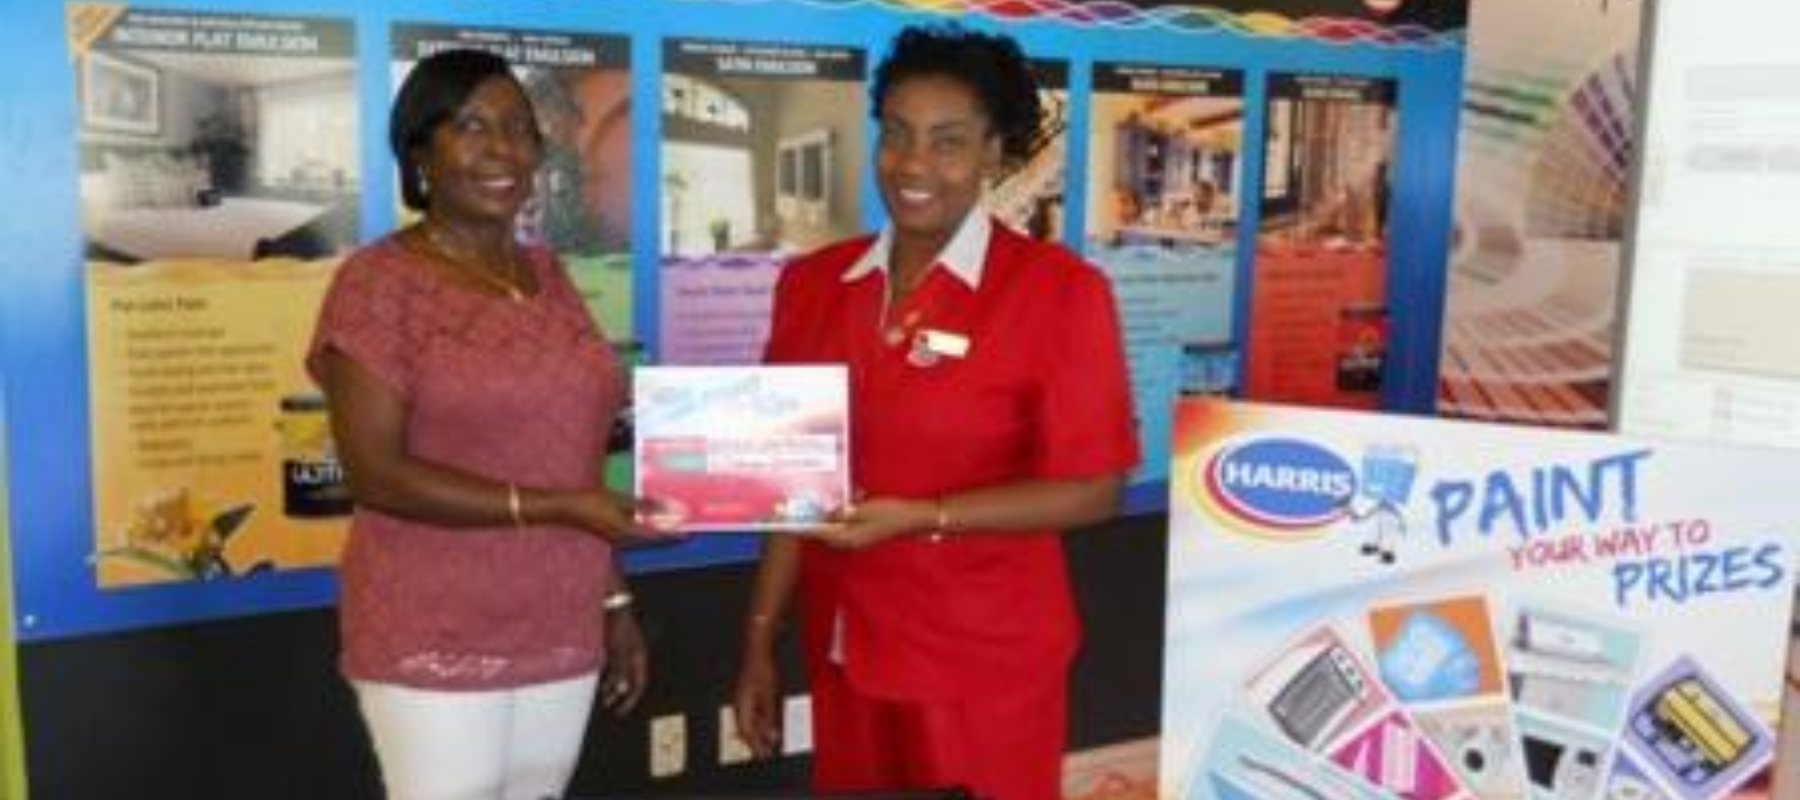 Harris' Suzanne Yarde presenting Sherron Stephens (right) with her Weber grill First-time homeowner Sherron Stephens has another reason to celebrate, as she is one of the lucky winners in this year's Harris Paints " Prizes for 40 Years" Christmas promotio